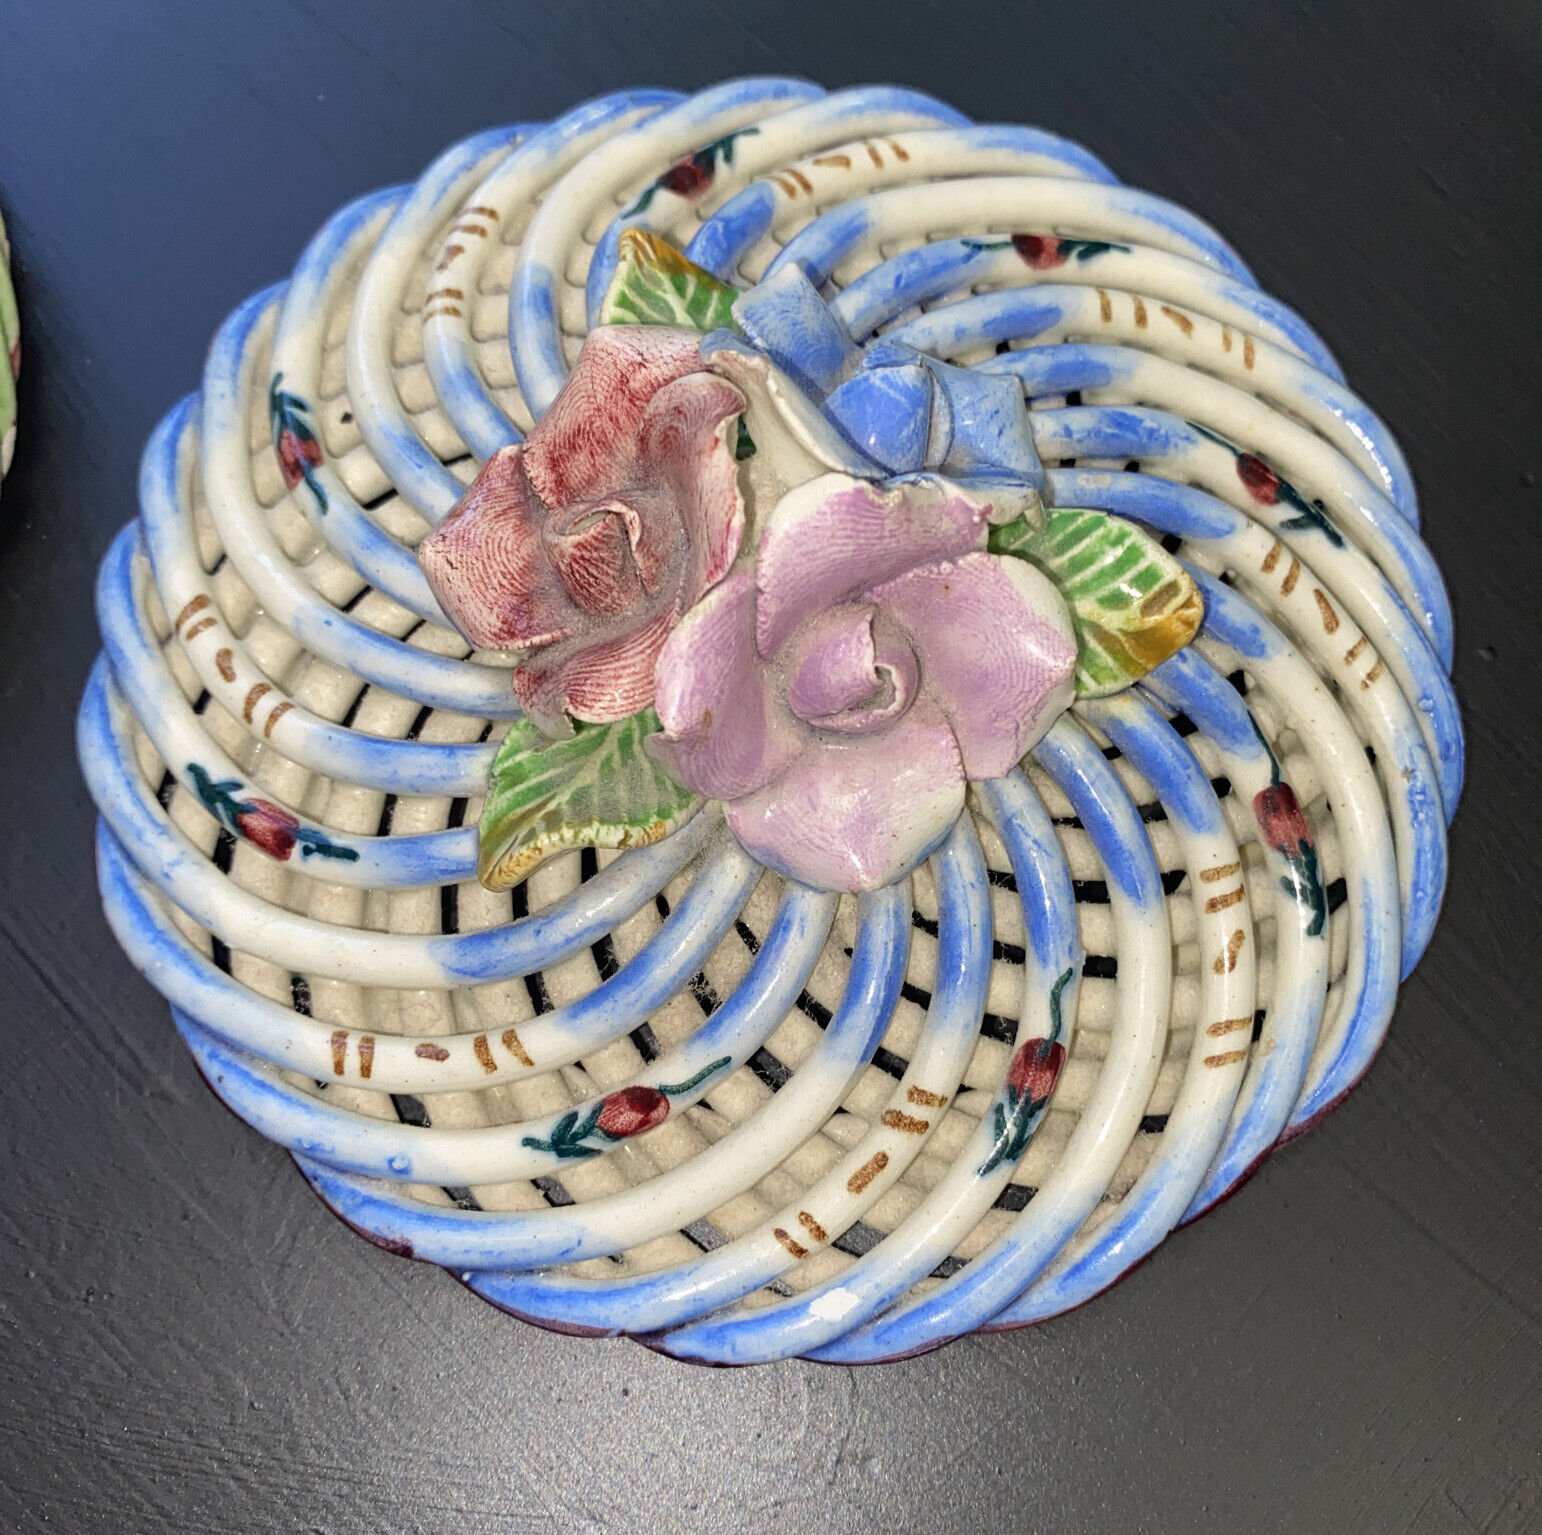 Vintage Goodfriend made in Spain Ceramic Rope Weave Floral Bowl With Lid,  Flower